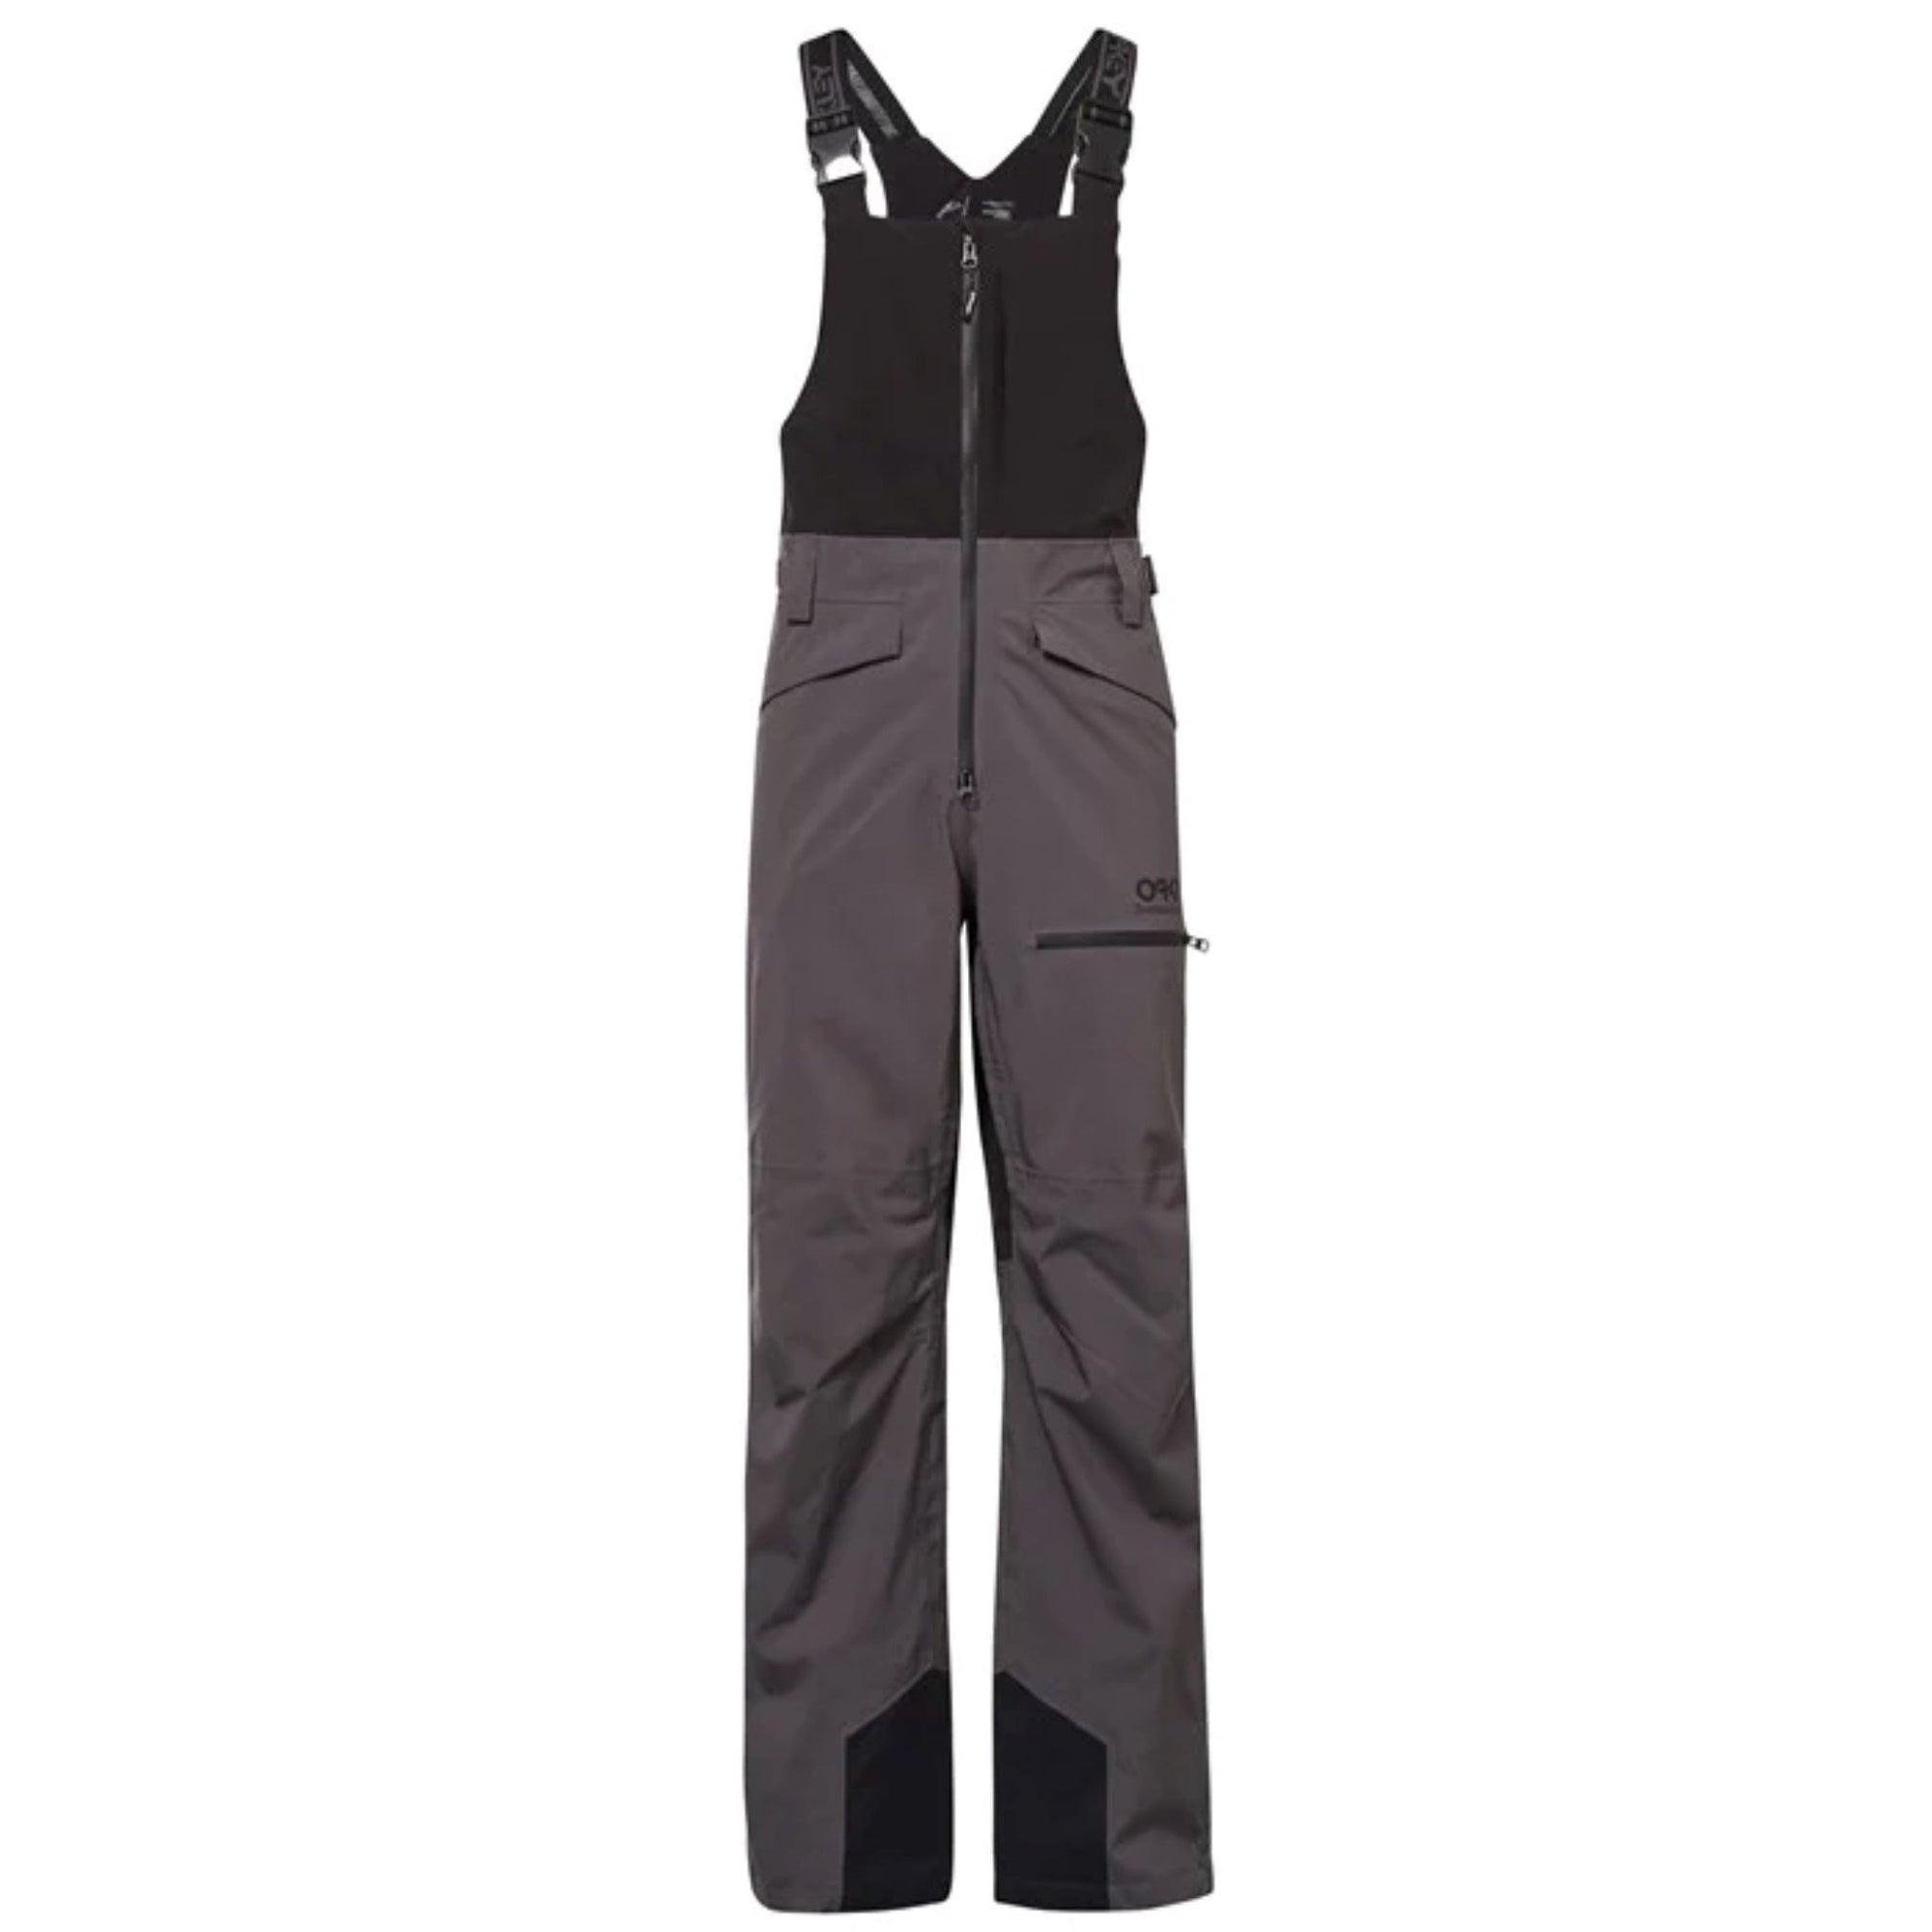 Mens Oakley Thermonuclear Protection Shell Bib Pant - Forged Iron/Blackout Pants Oakley S INTL / S AU 